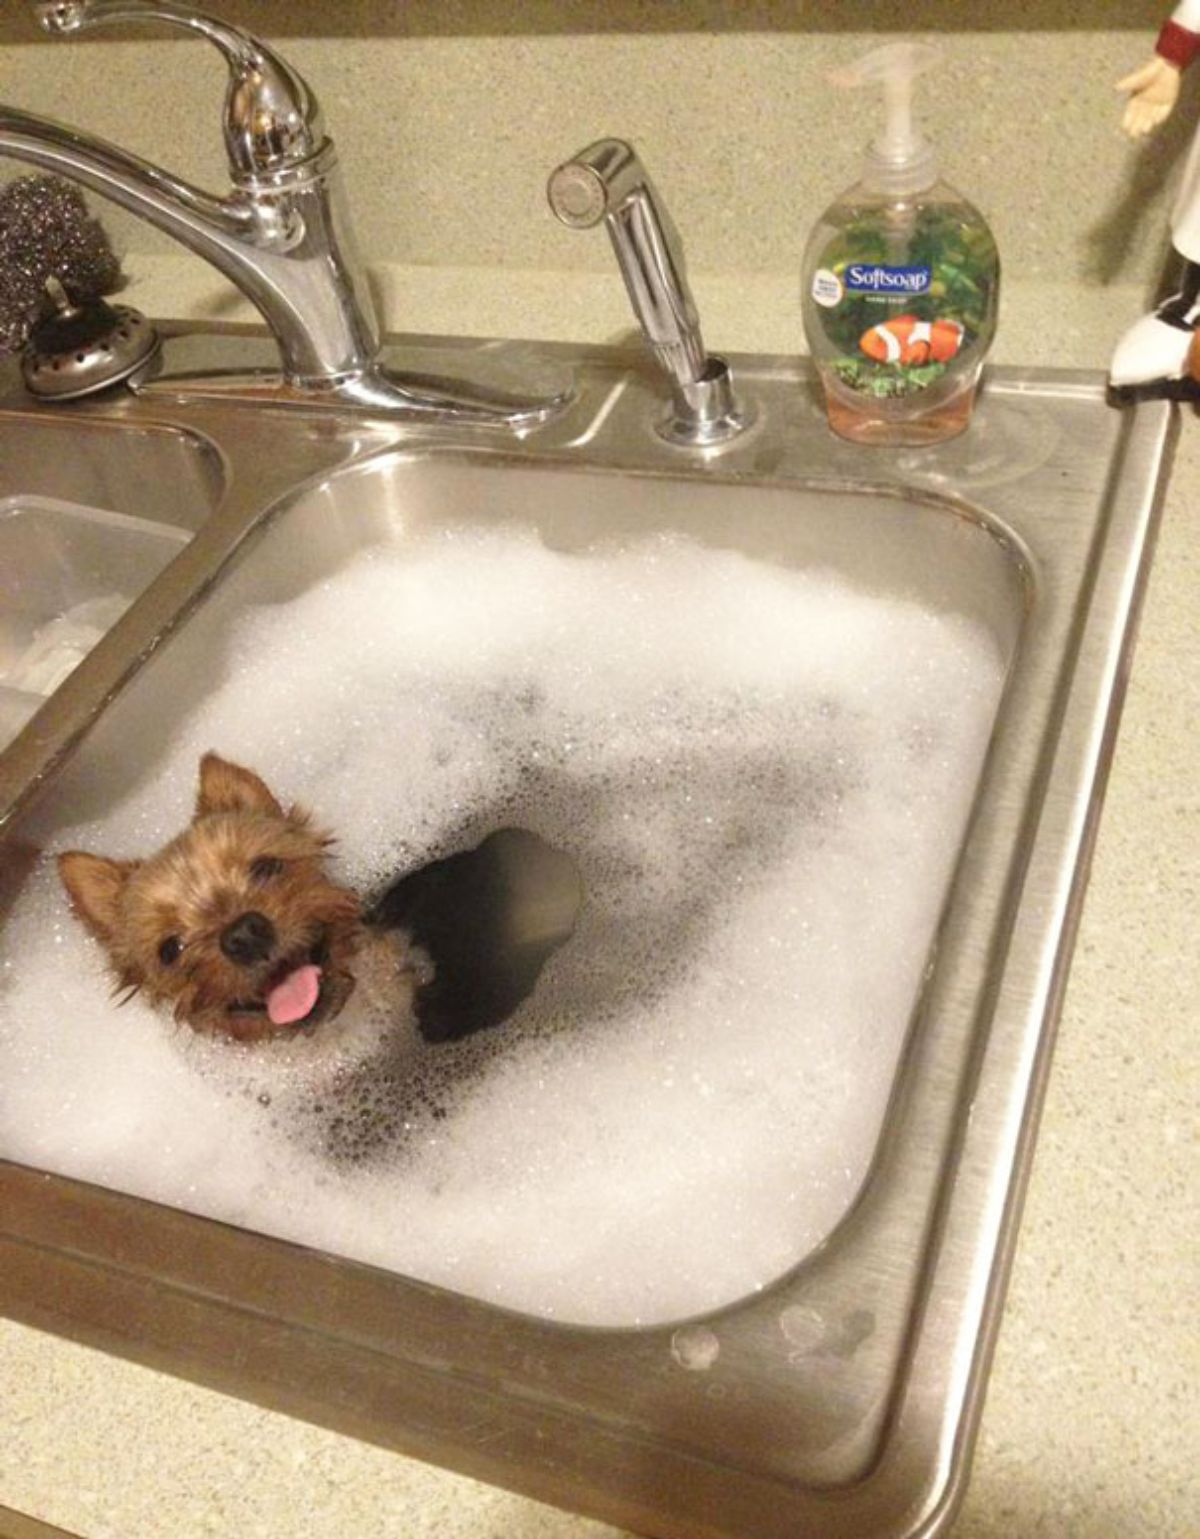 brown and black yorkshire terrier in soapy water in a kitchen sink